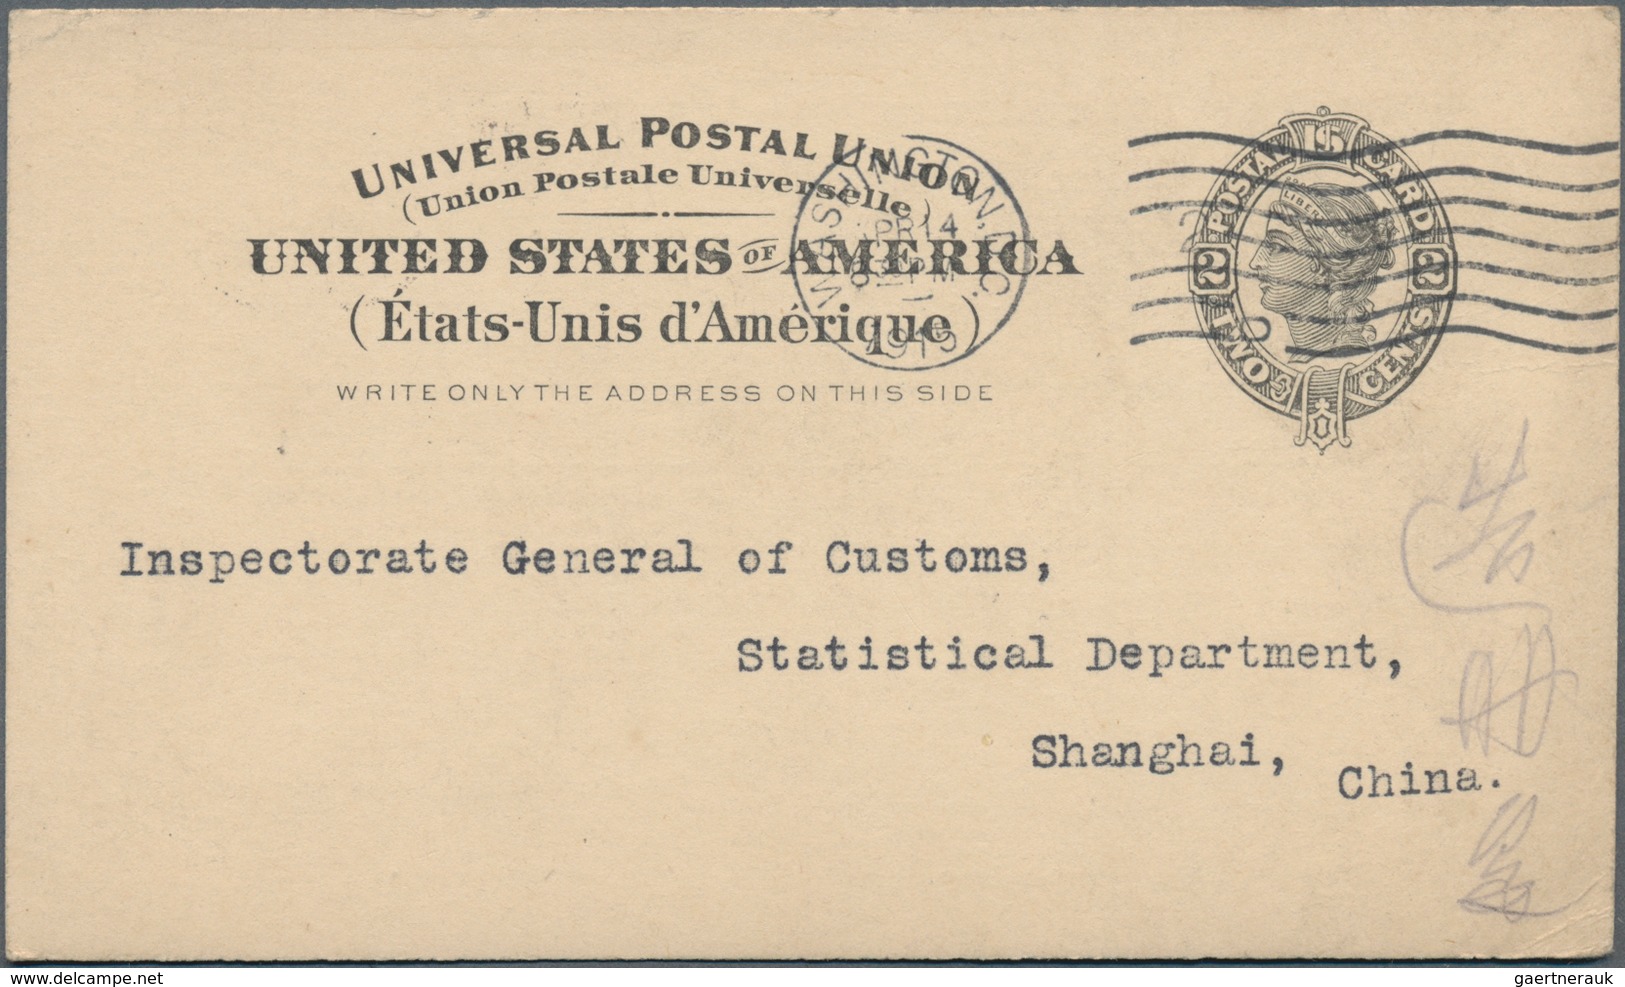 China - Incoming Mail: 1913/16, to IMC statistical department Shanghai, used stationery cards from U